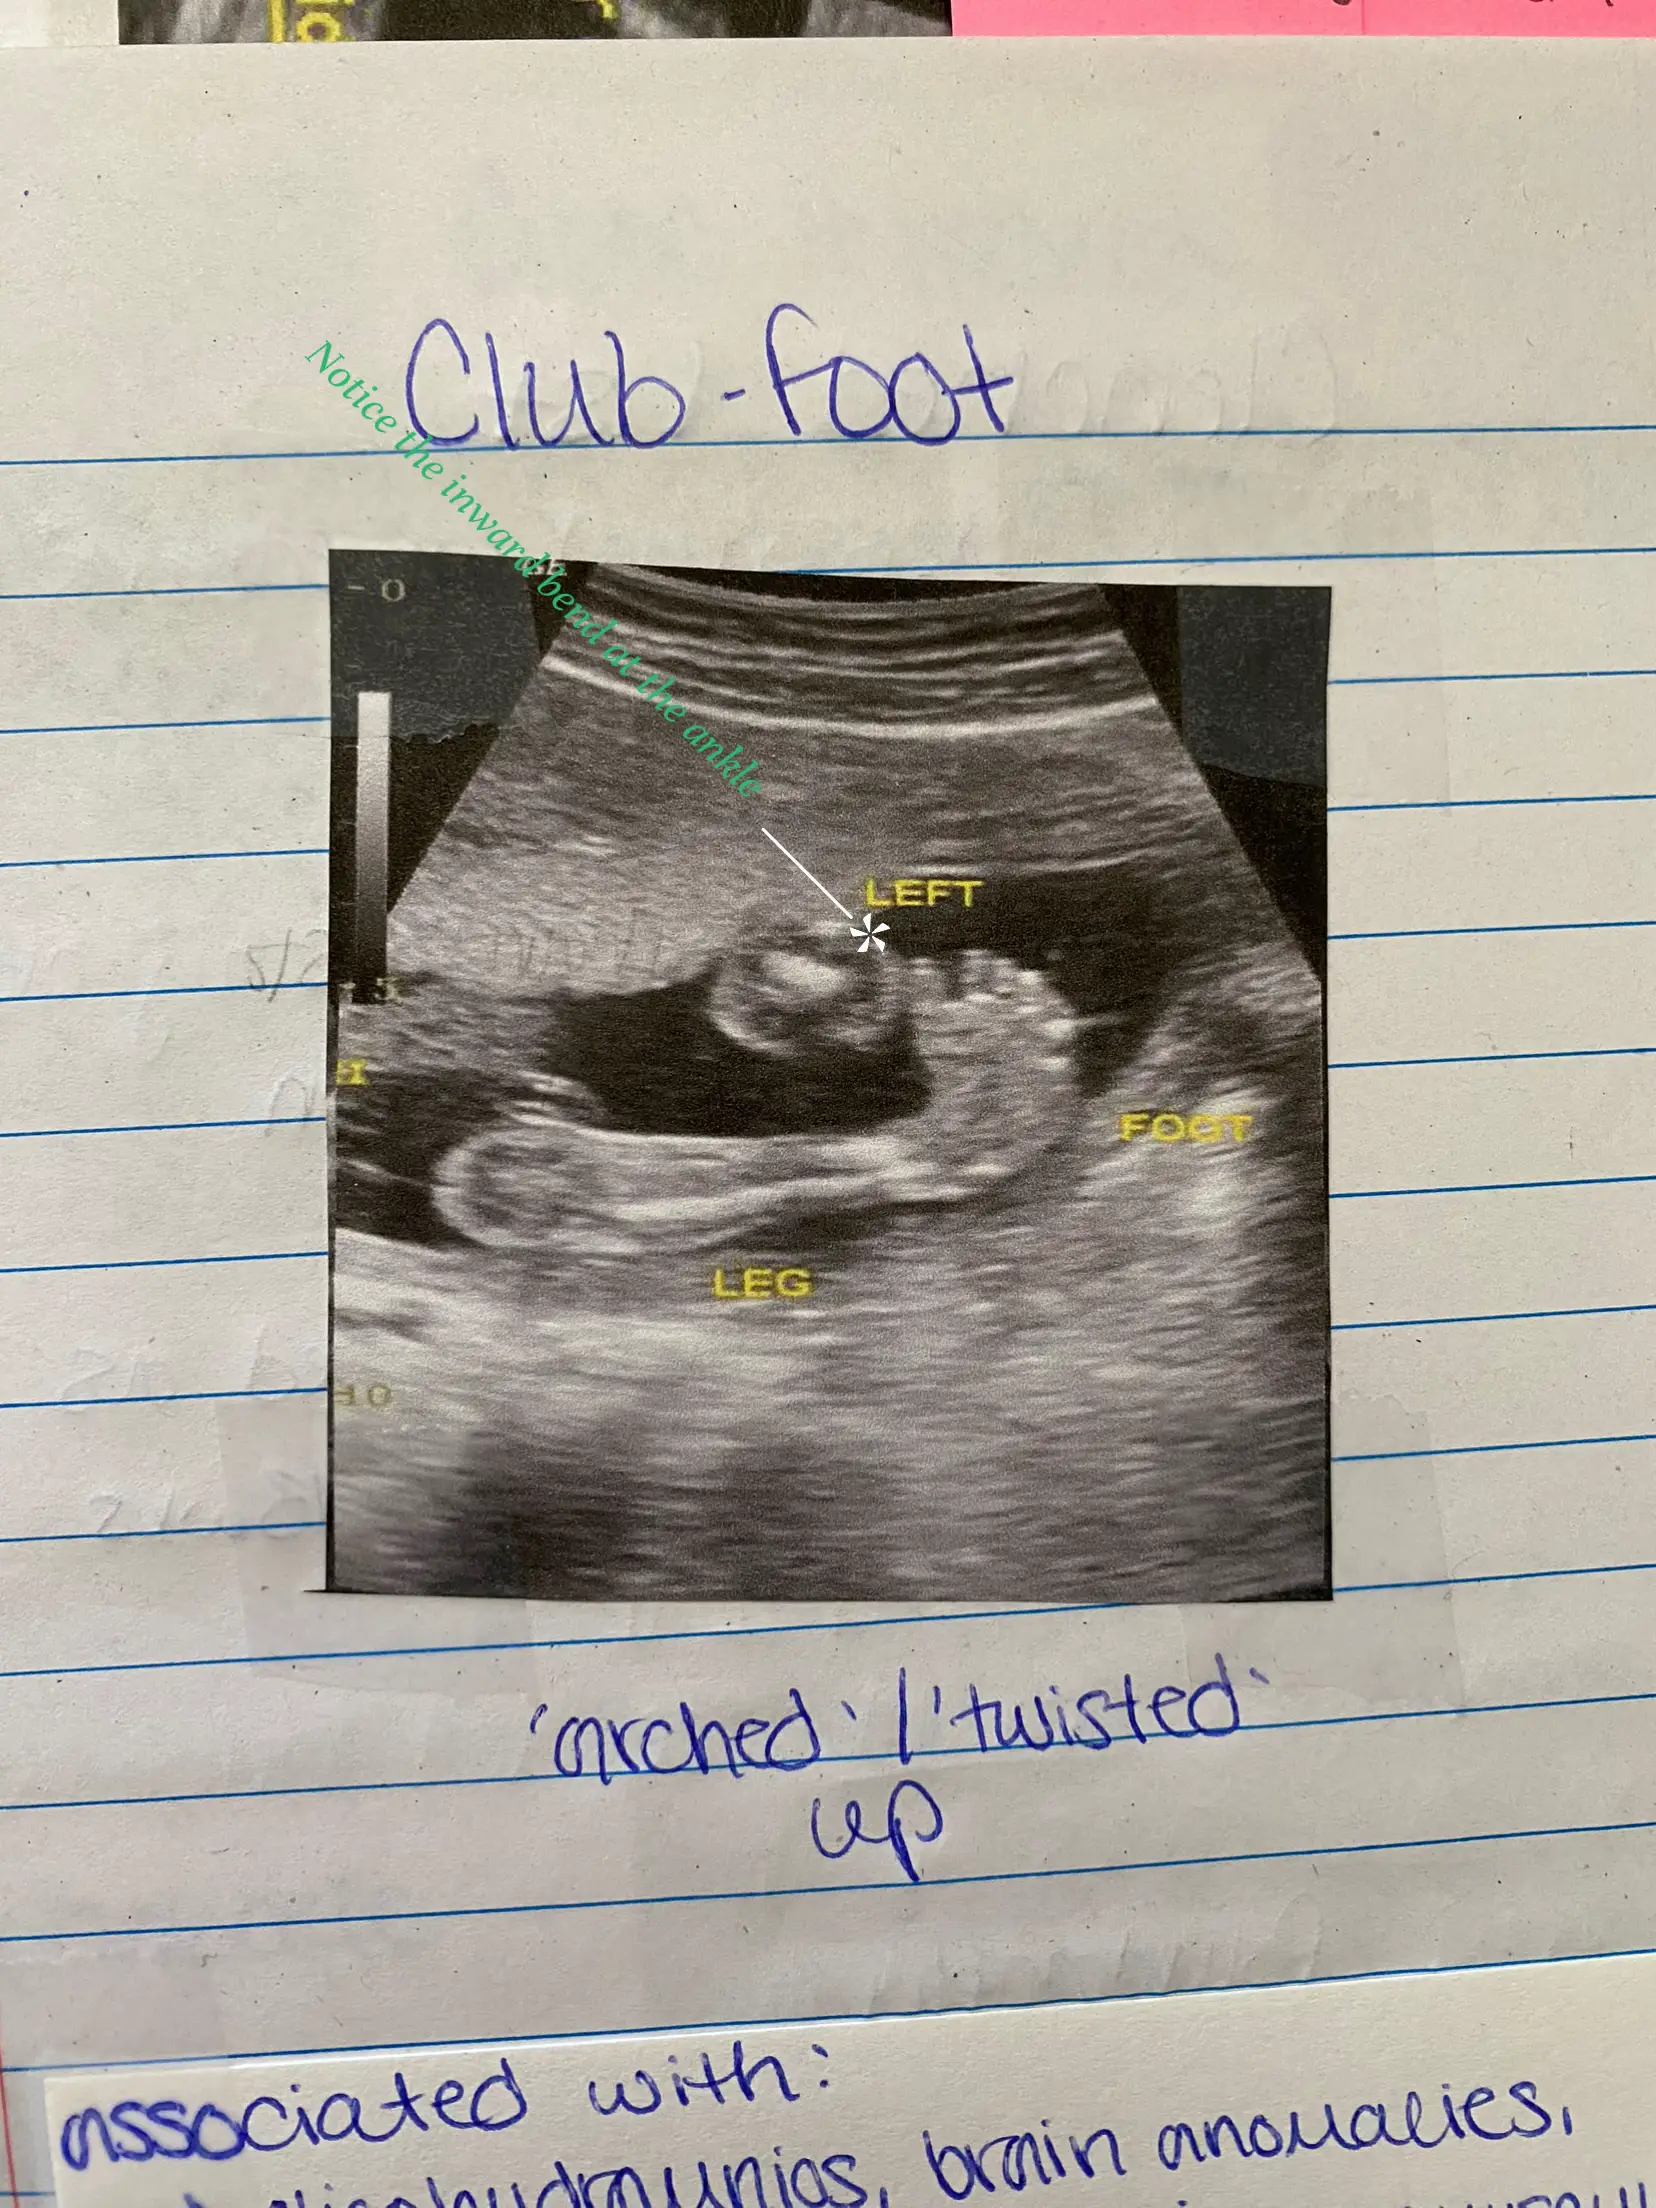  A drawing of a baby's leg with a note that says "LEFT FOOT LEG" above it.